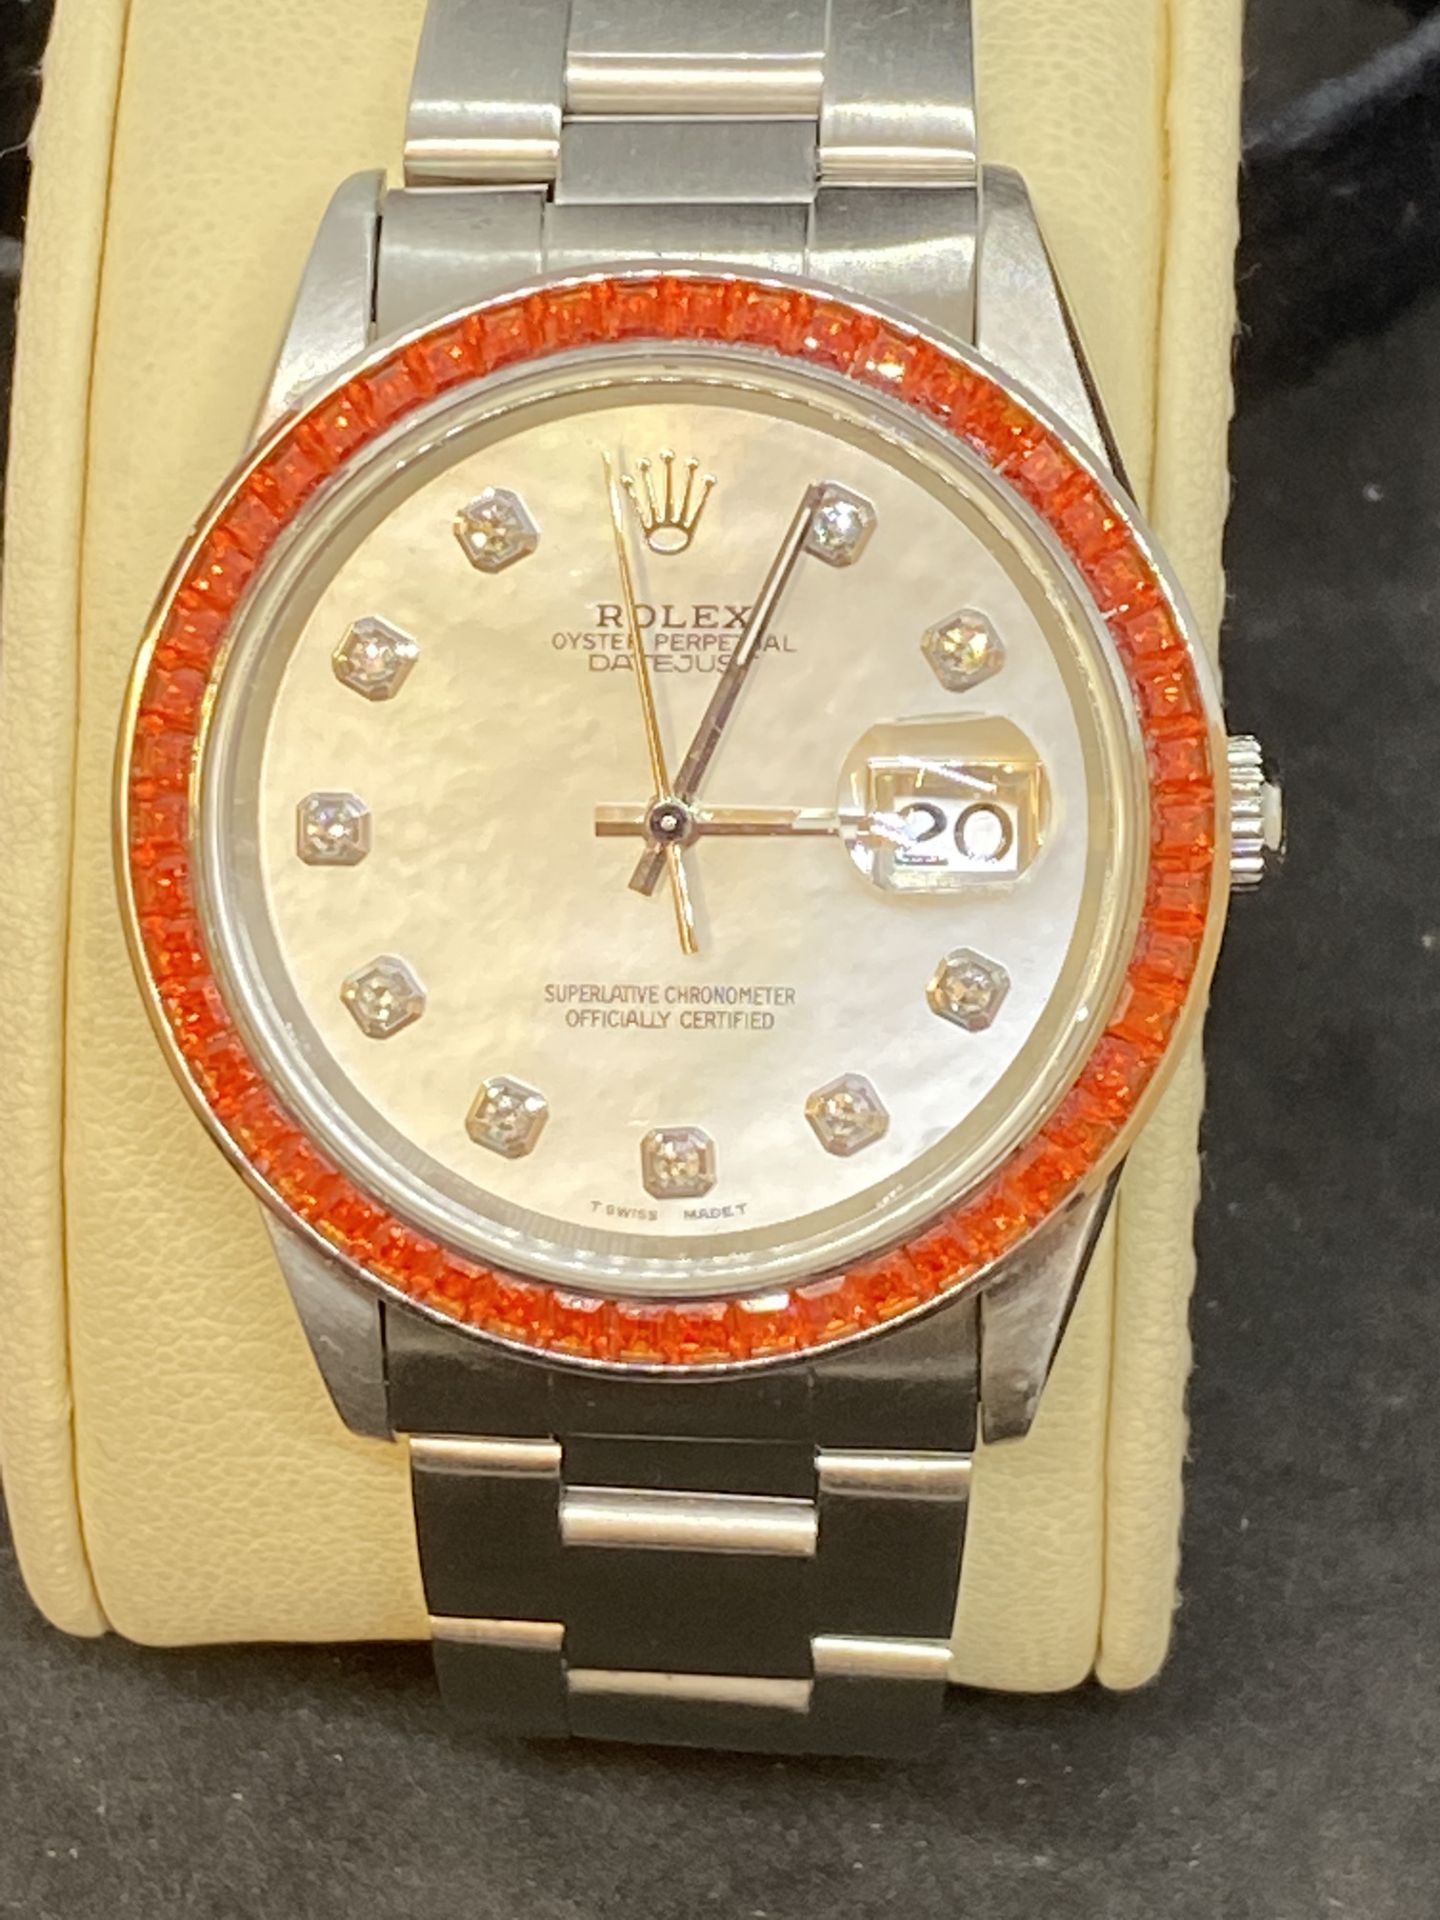 STAINLESS STEEL AUTOMATIC ROLEX WITH DIAMOND DOT DIAL & ORANGE BEZEL